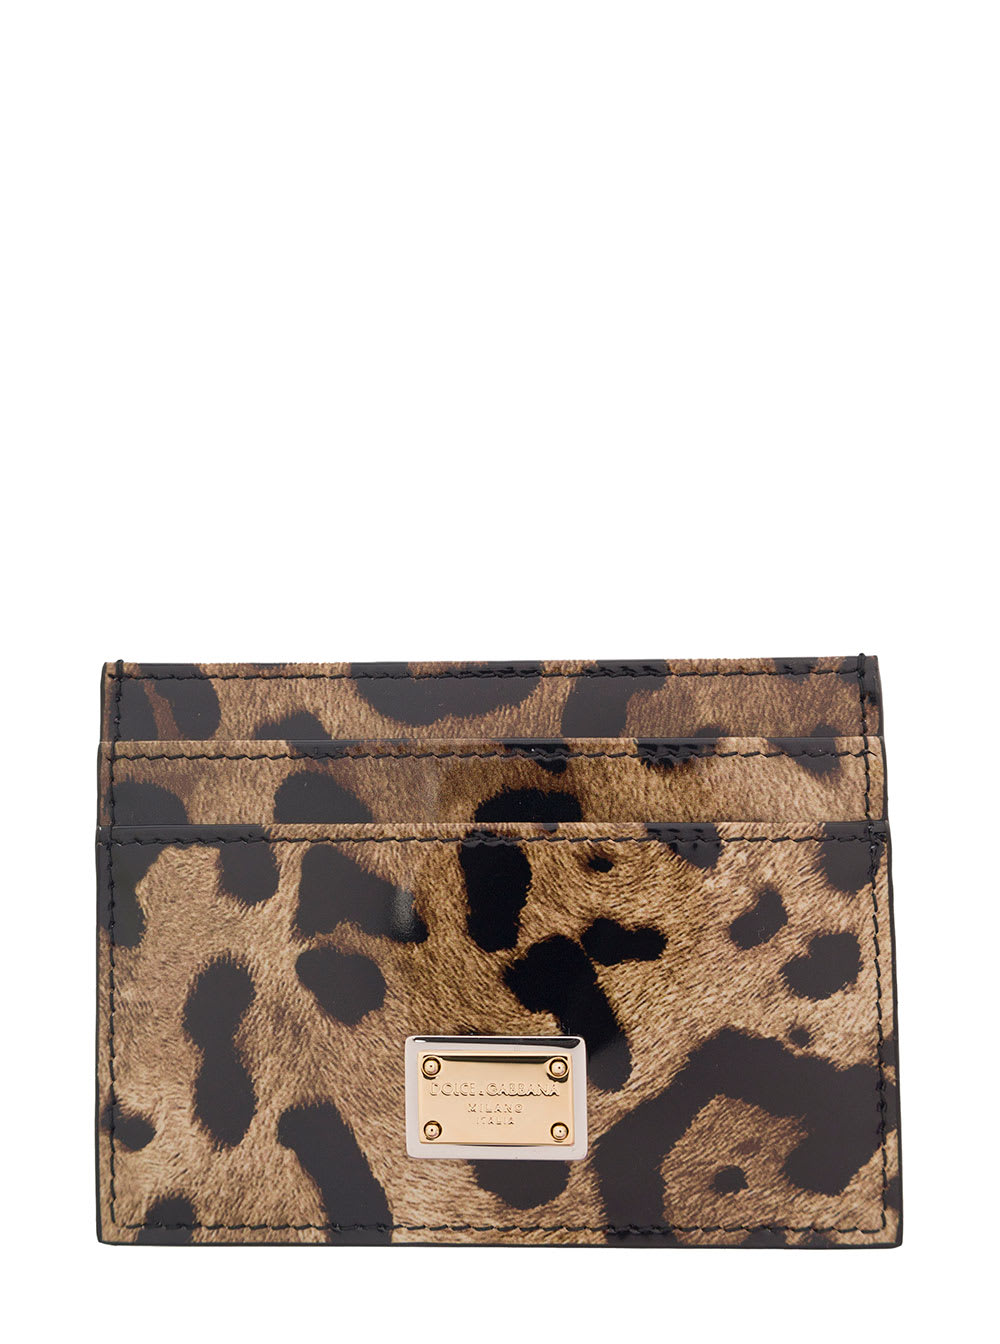 Dolce & Gabbana Cardholder In Printed Leo Shiny Calfskin Enriched With Logoed Plaque.